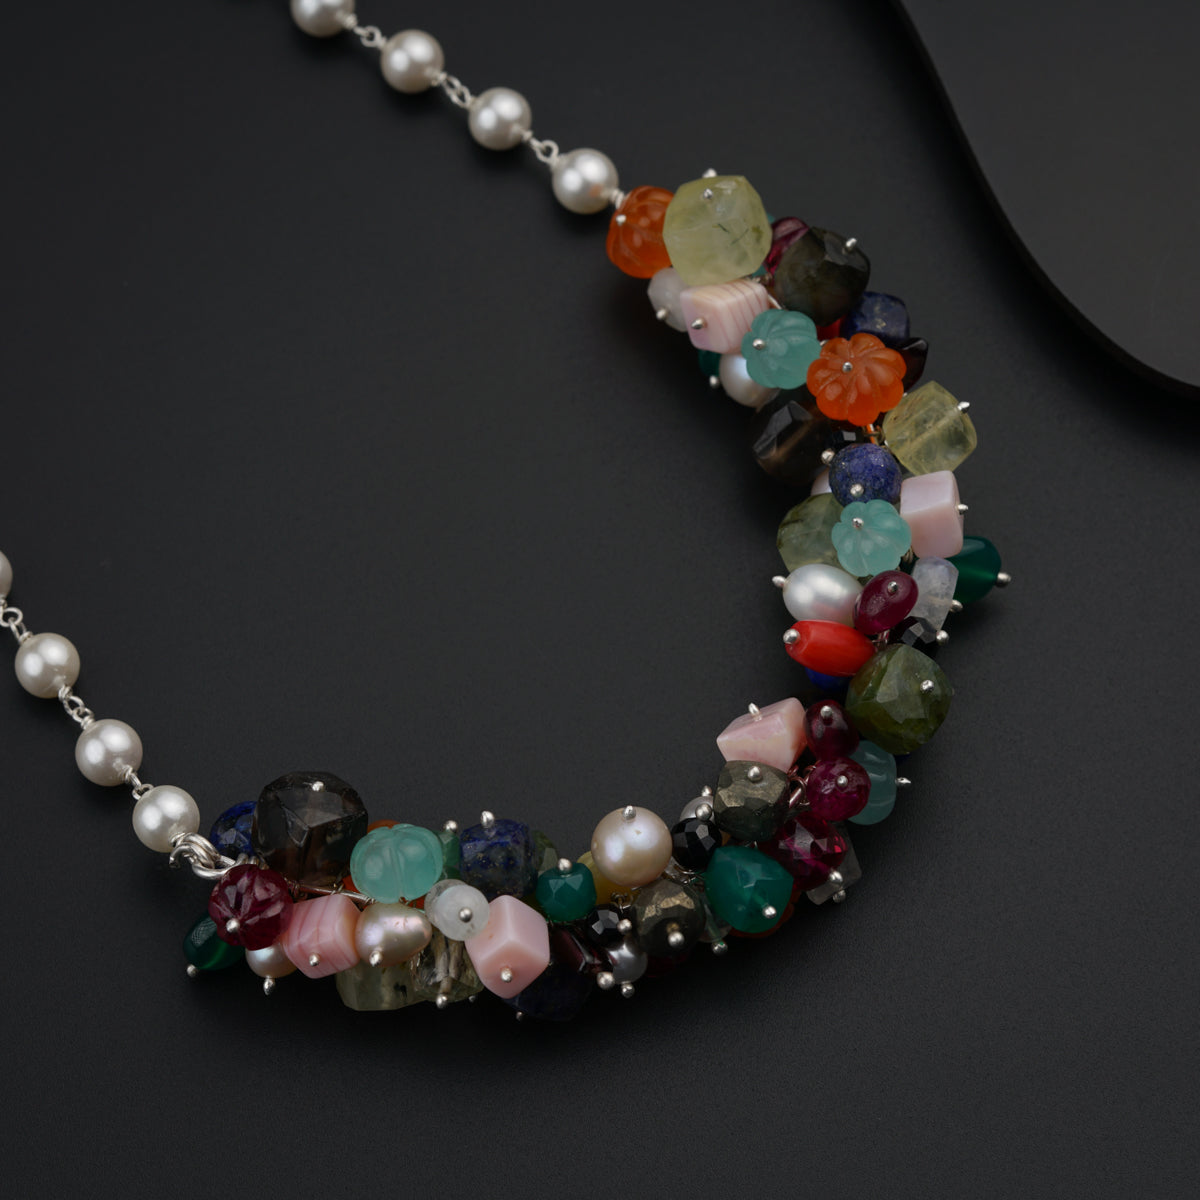 a multi - colored beaded necklace with pearls on a black surface